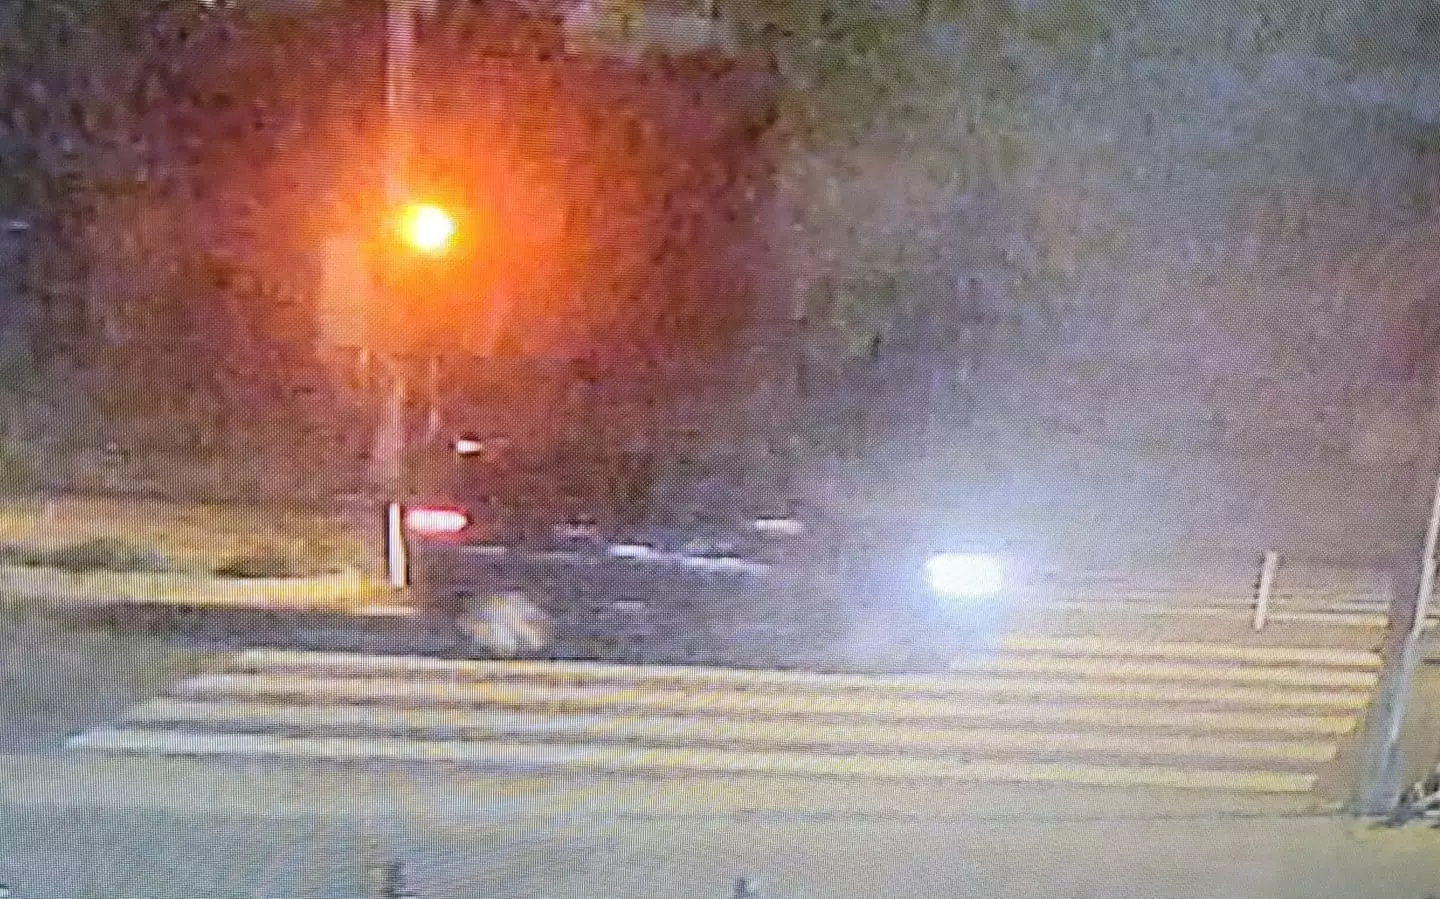 The vehicle police believe may have been involved in the abduction.